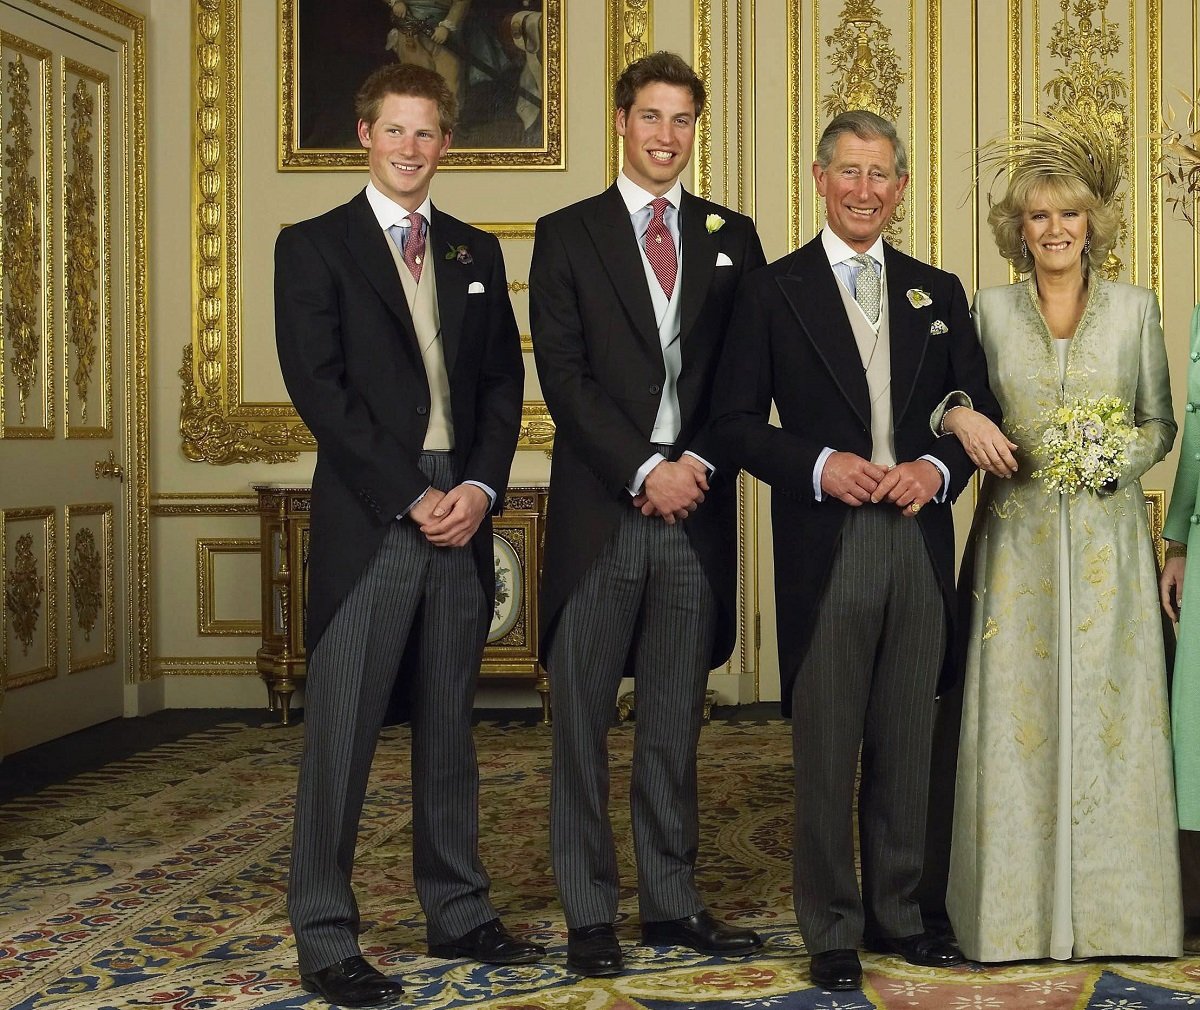 Former Royal Family Butler Remembers Prince Harry Was ‘Excited’ About Charles and Camilla’s Wedding so What He’s Saying Now ‘Makes No Sense’